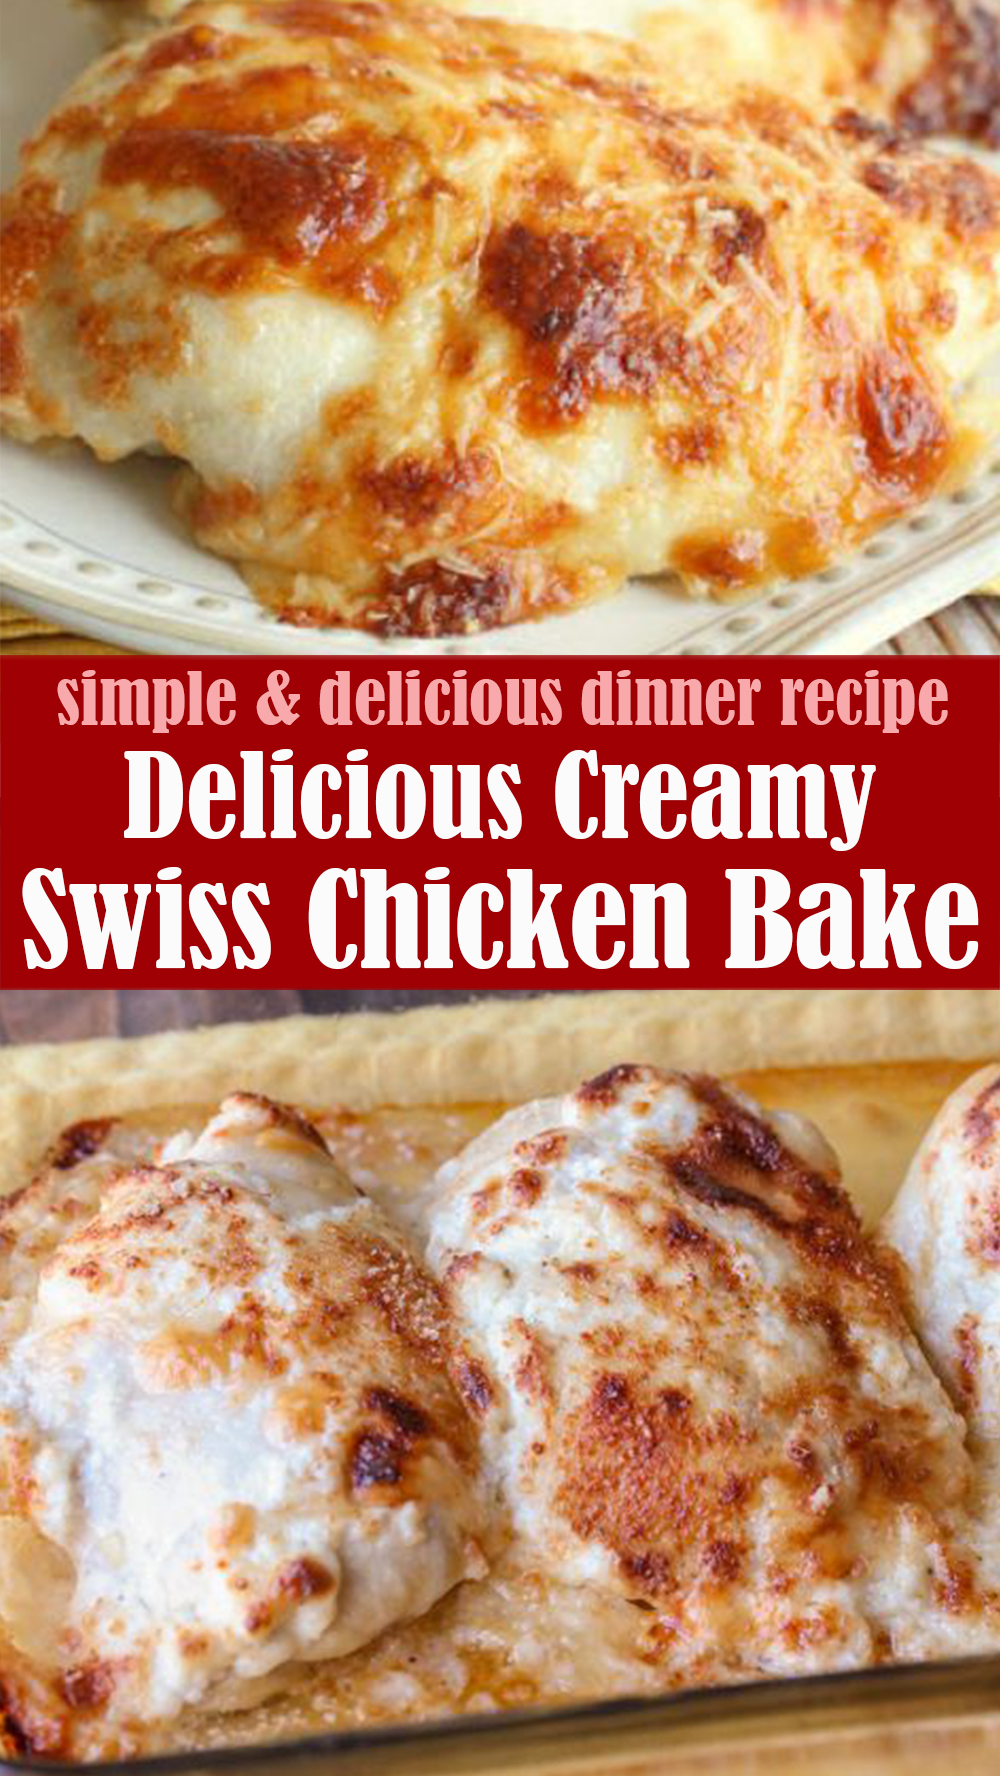 Easy and Delicious Creamy Swiss Chicken Bake